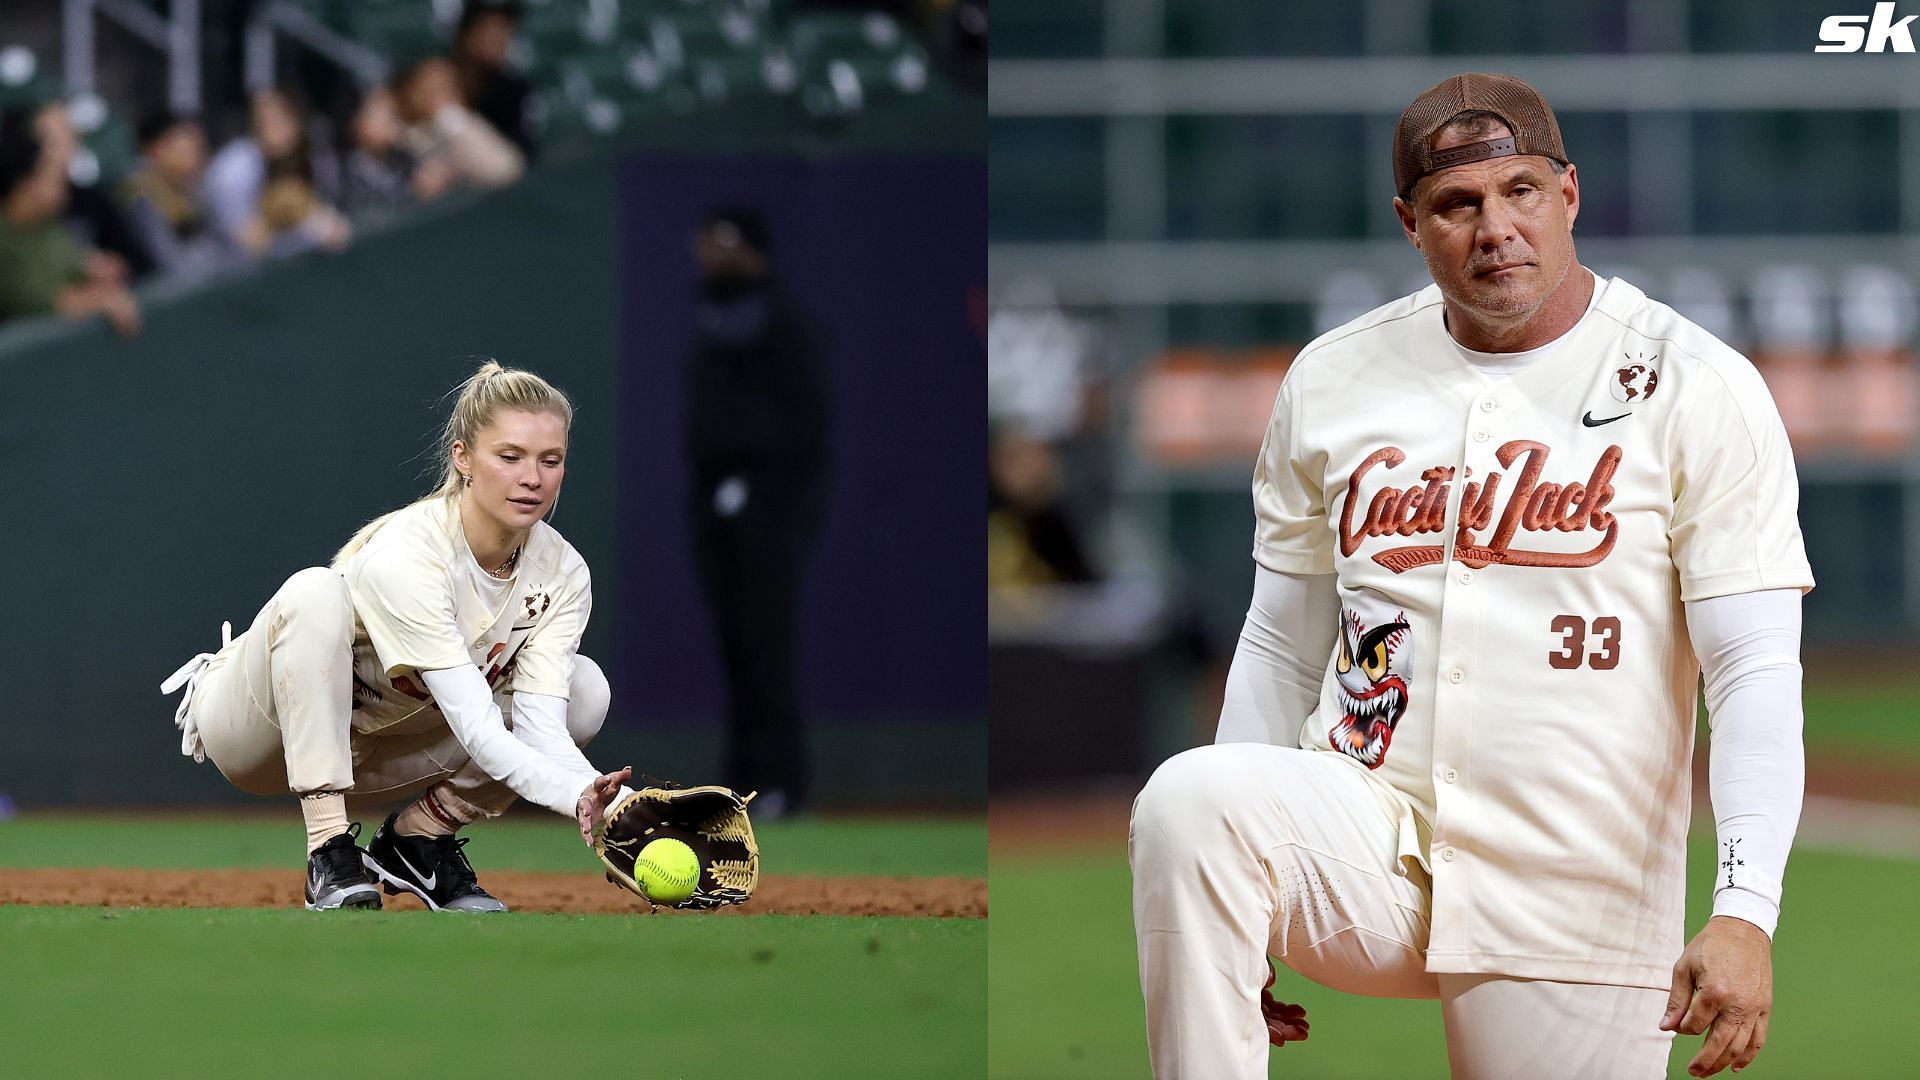 MLB legend Jose Canseco and daughter Josie Canseco attend the 2023 Cactus Jack Foundation HBCU Celebrity Softball Classic at Minute Maid Park in February 2023